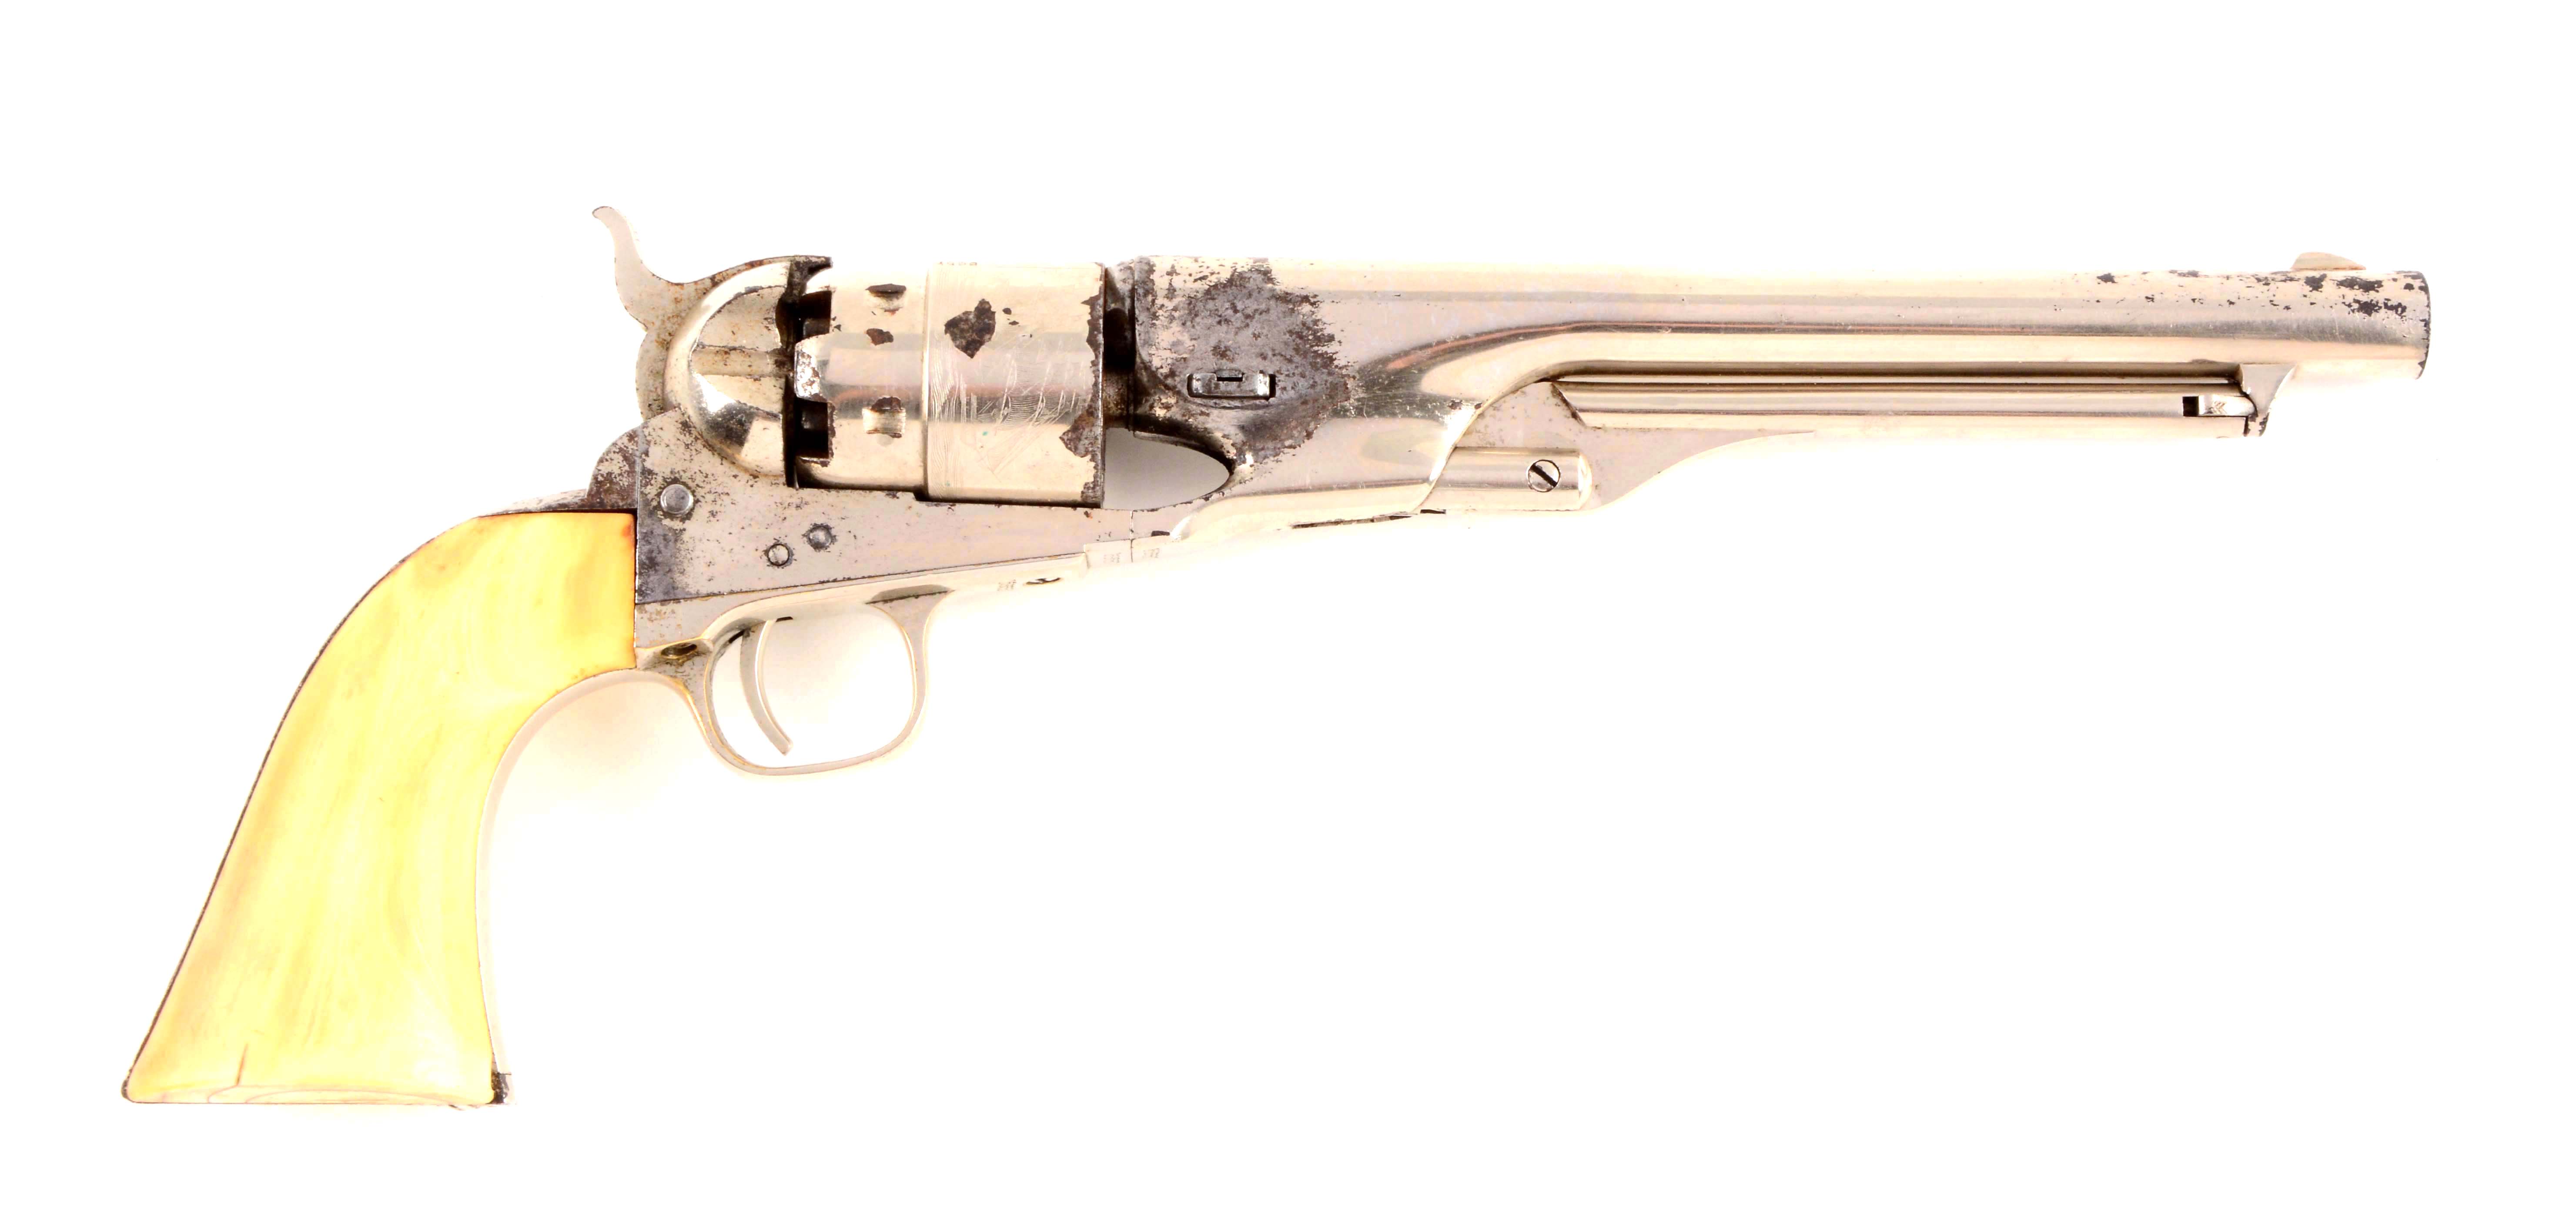 Colt Model 1860 Army Single Action Revolver Inscribed to Buffalo Bill Cody, estimated at $40,000-60,000.